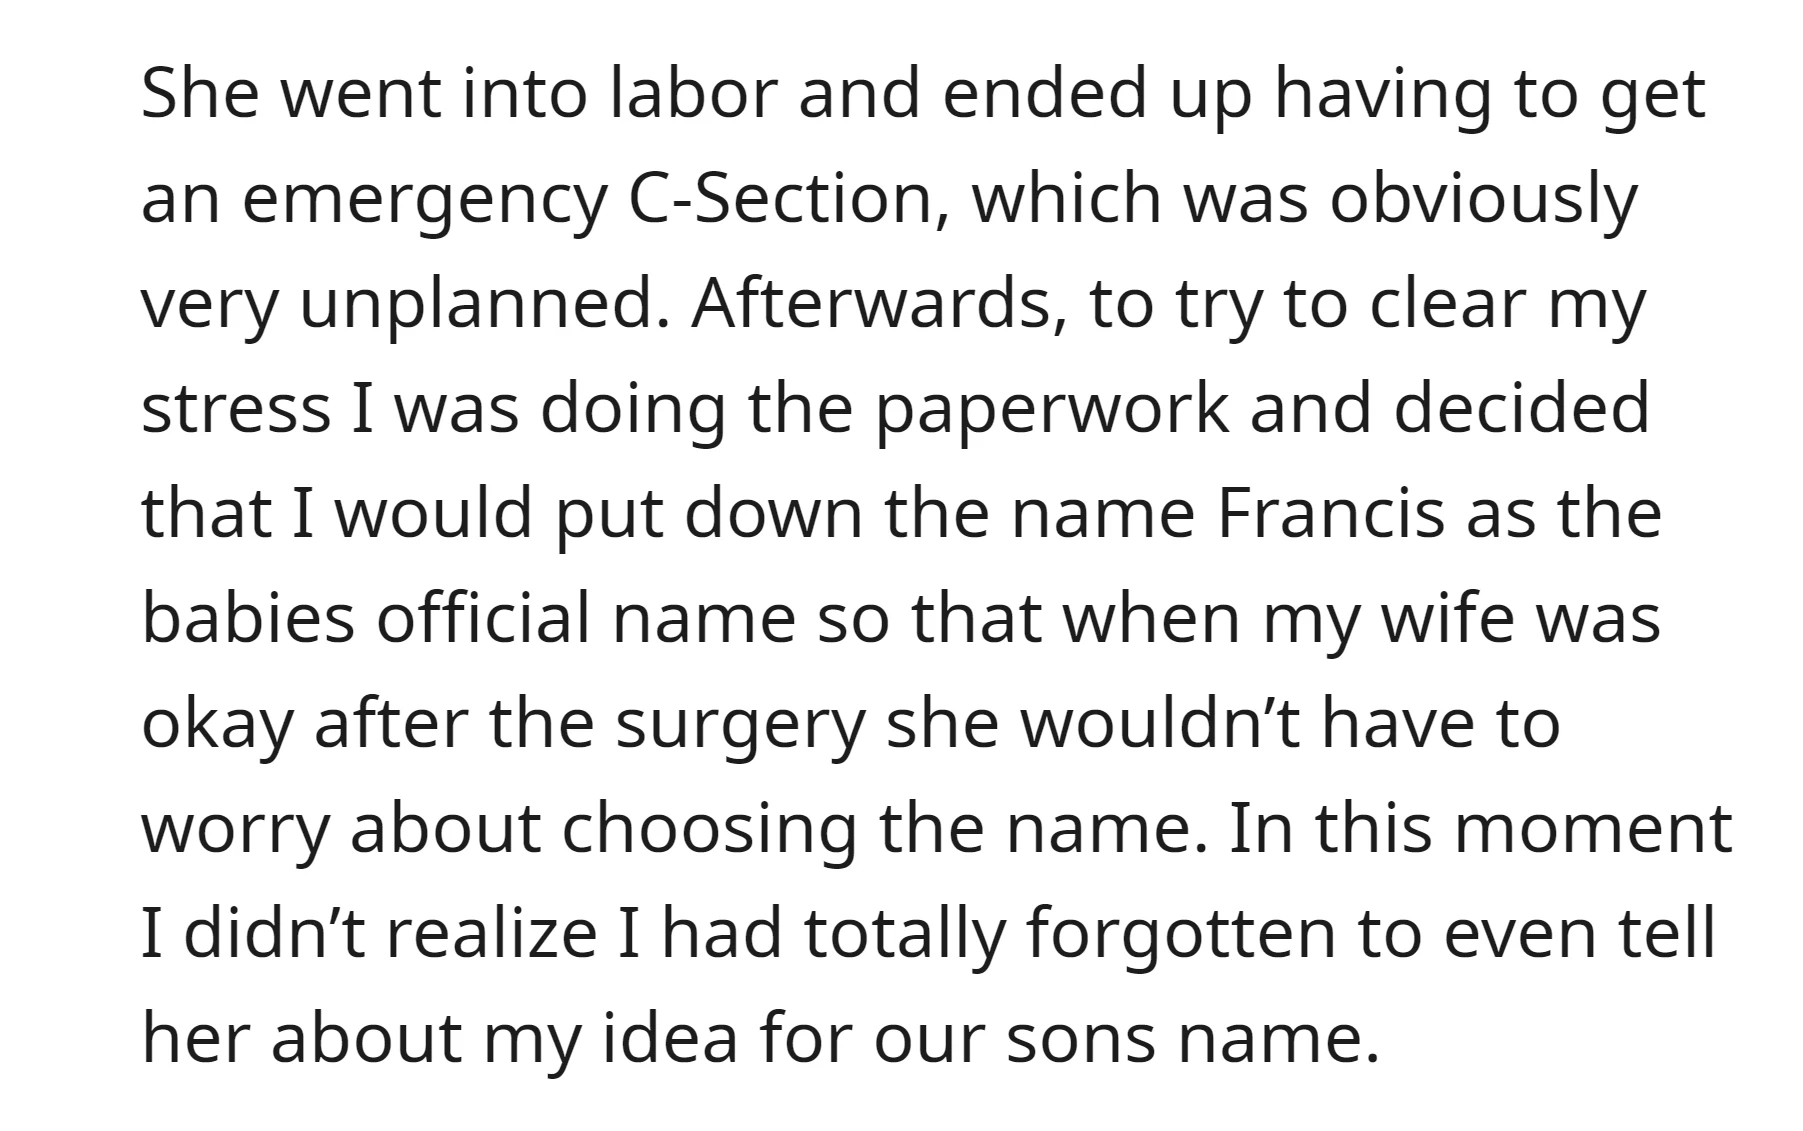 OP decided to name their son Francis on the official paperwork